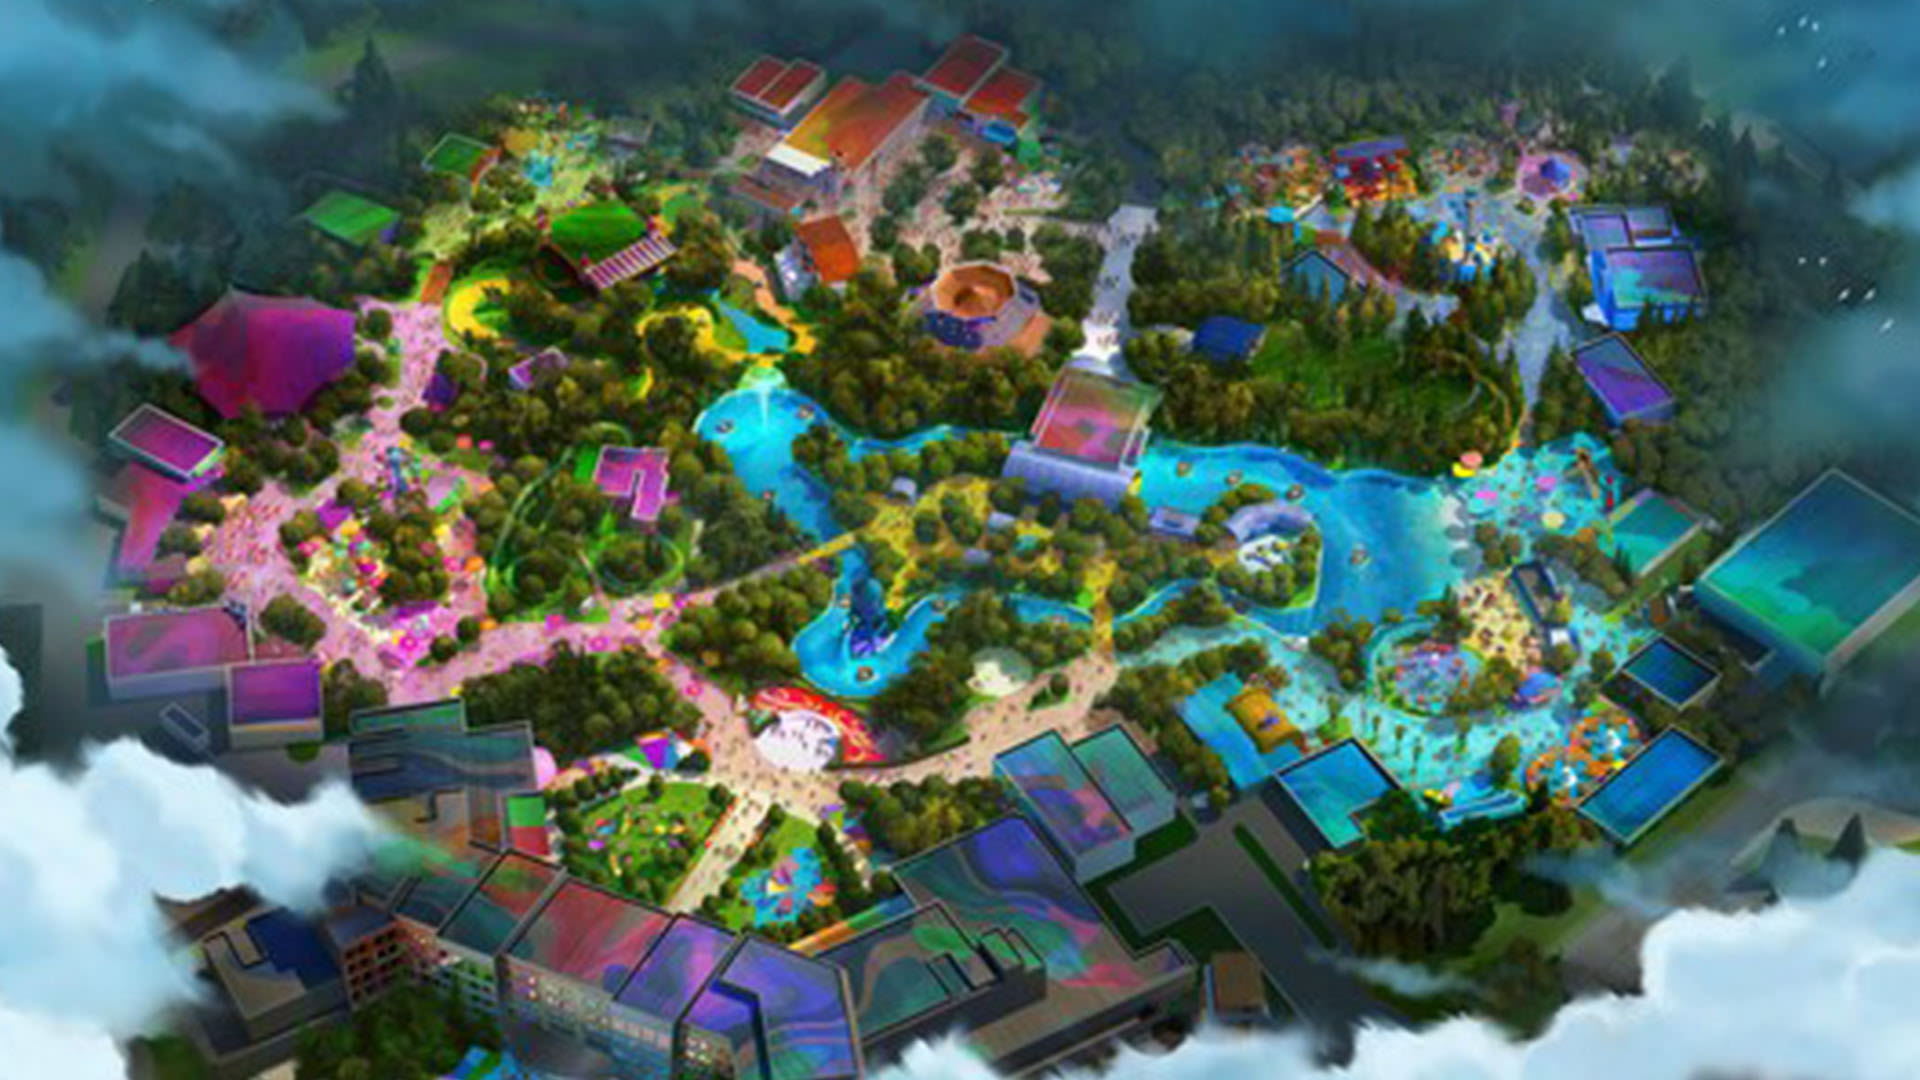 Work starts on incredible Universal new theme park aimed at younger kids